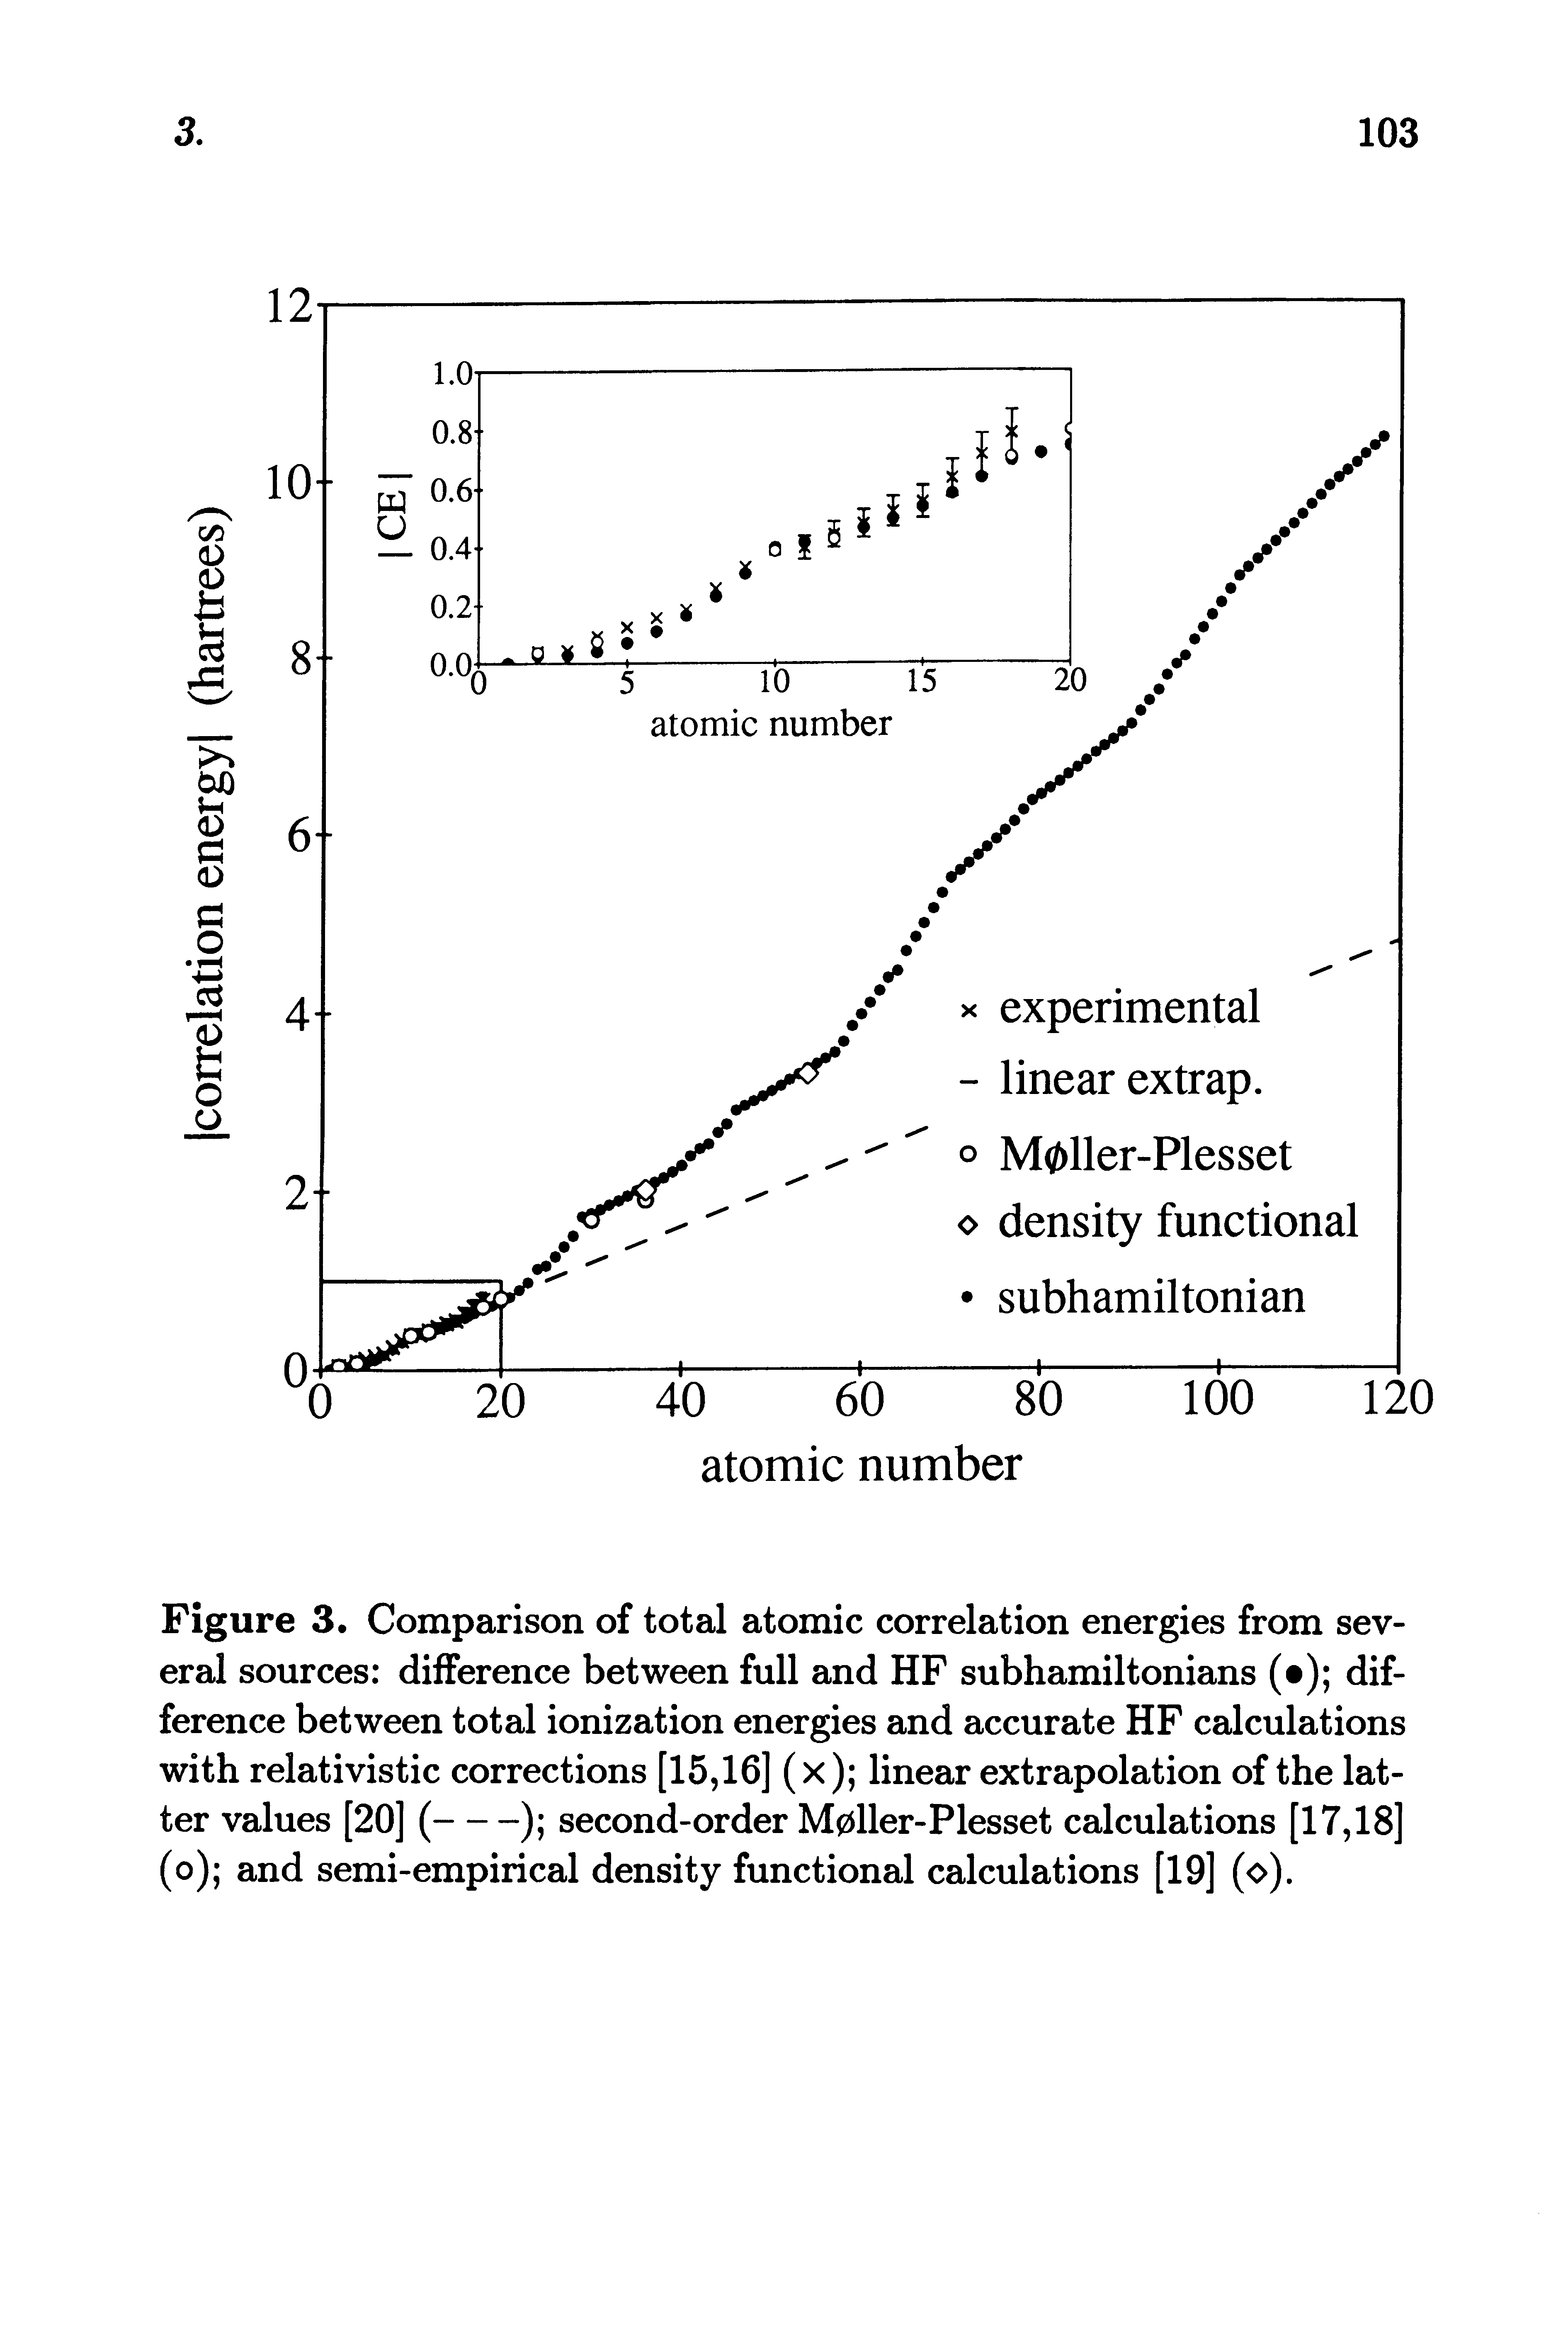 Figure 3. Comparison of total atomic correlation energies from several sources difference between full and HF subhamiltonians ( ) difference between total ionization energies and accurate HF calculations with relativistic corrections [15,16] (x) linear extrapolation of the latter values [20] (--) second-order M0ller-Plesset calculations [17,18]...